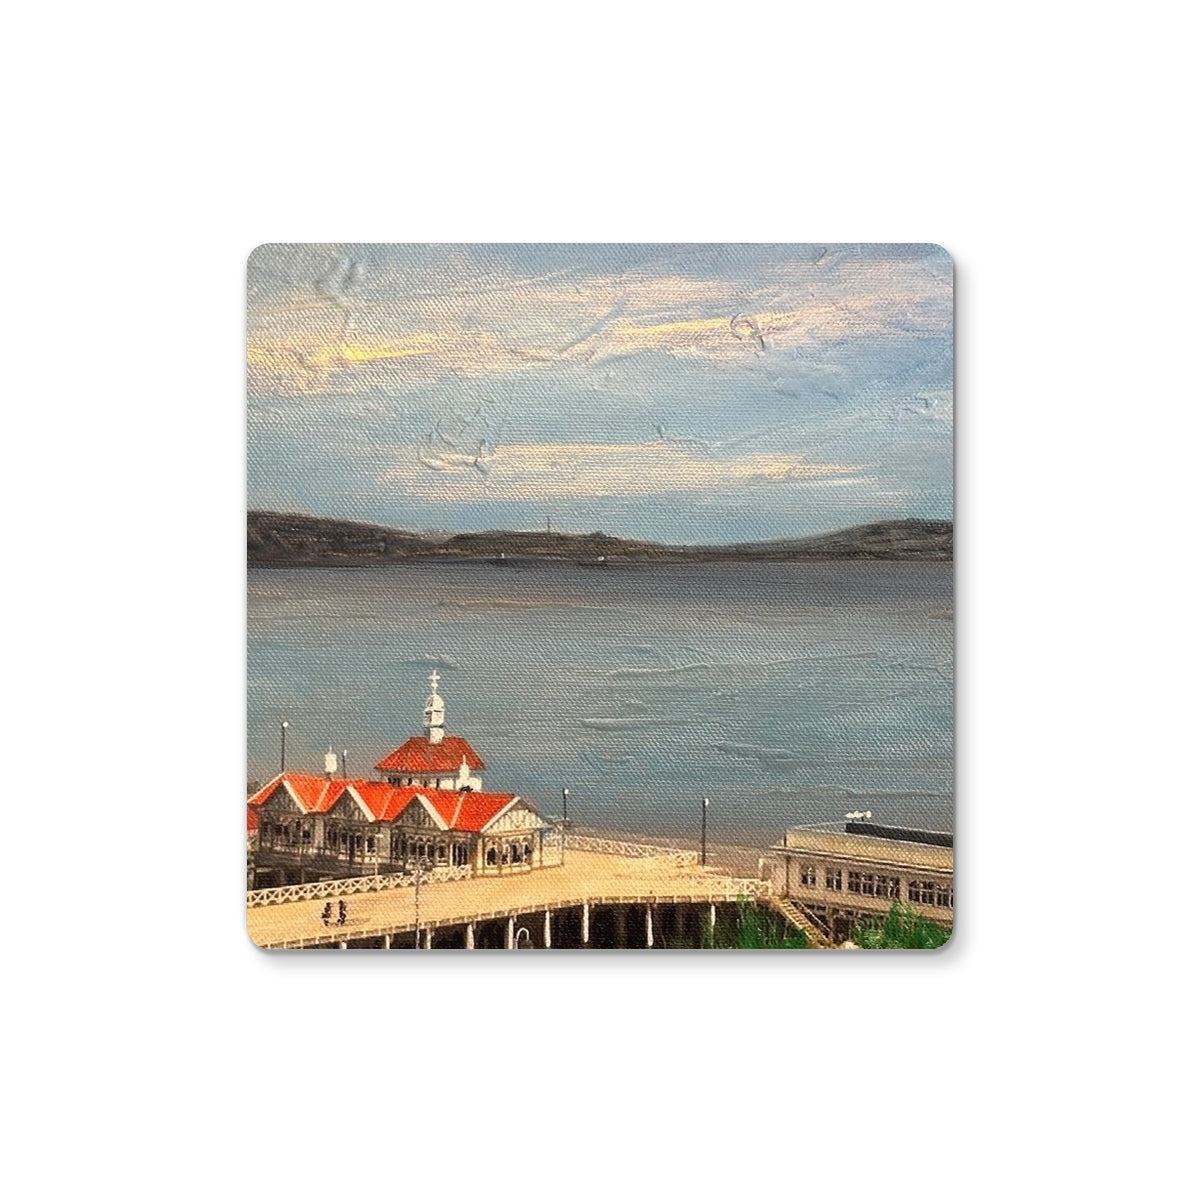 Looking From Dunoon Art Gifts Coaster-Homeware-River Clyde Art Gallery-6 Coasters-Paintings, Prints, Homeware, Art Gifts From Scotland By Scottish Artist Kevin Hunter